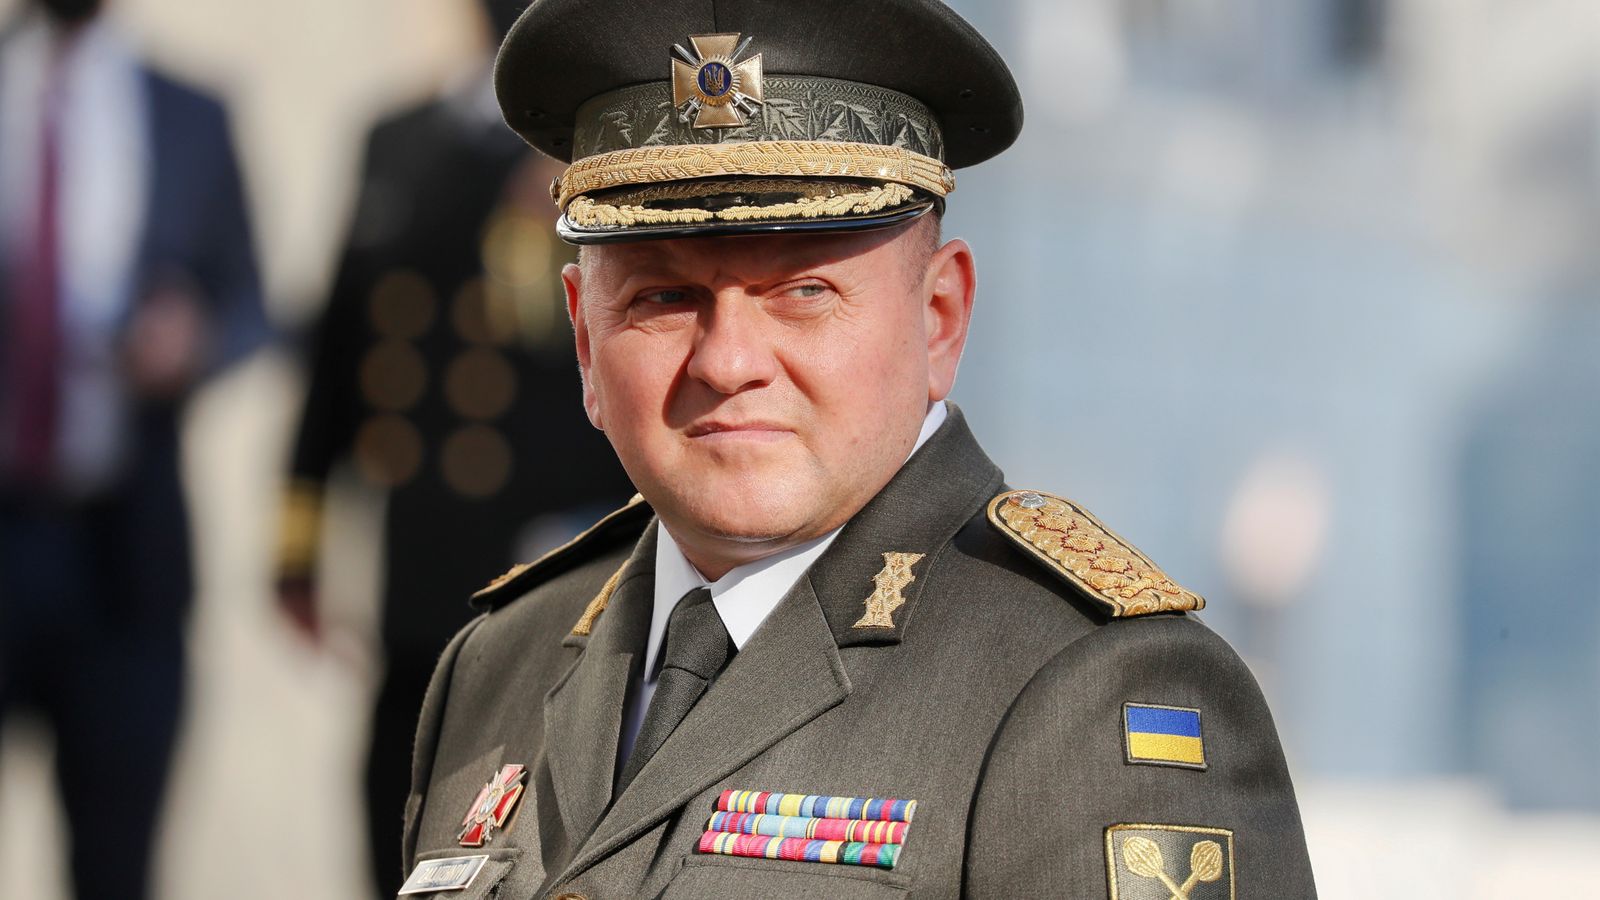 Ukraine's top general Valerii Zaluzhnyi 'refuses request to step down' amid rumours of rift with Volodymyr Zelenskyy